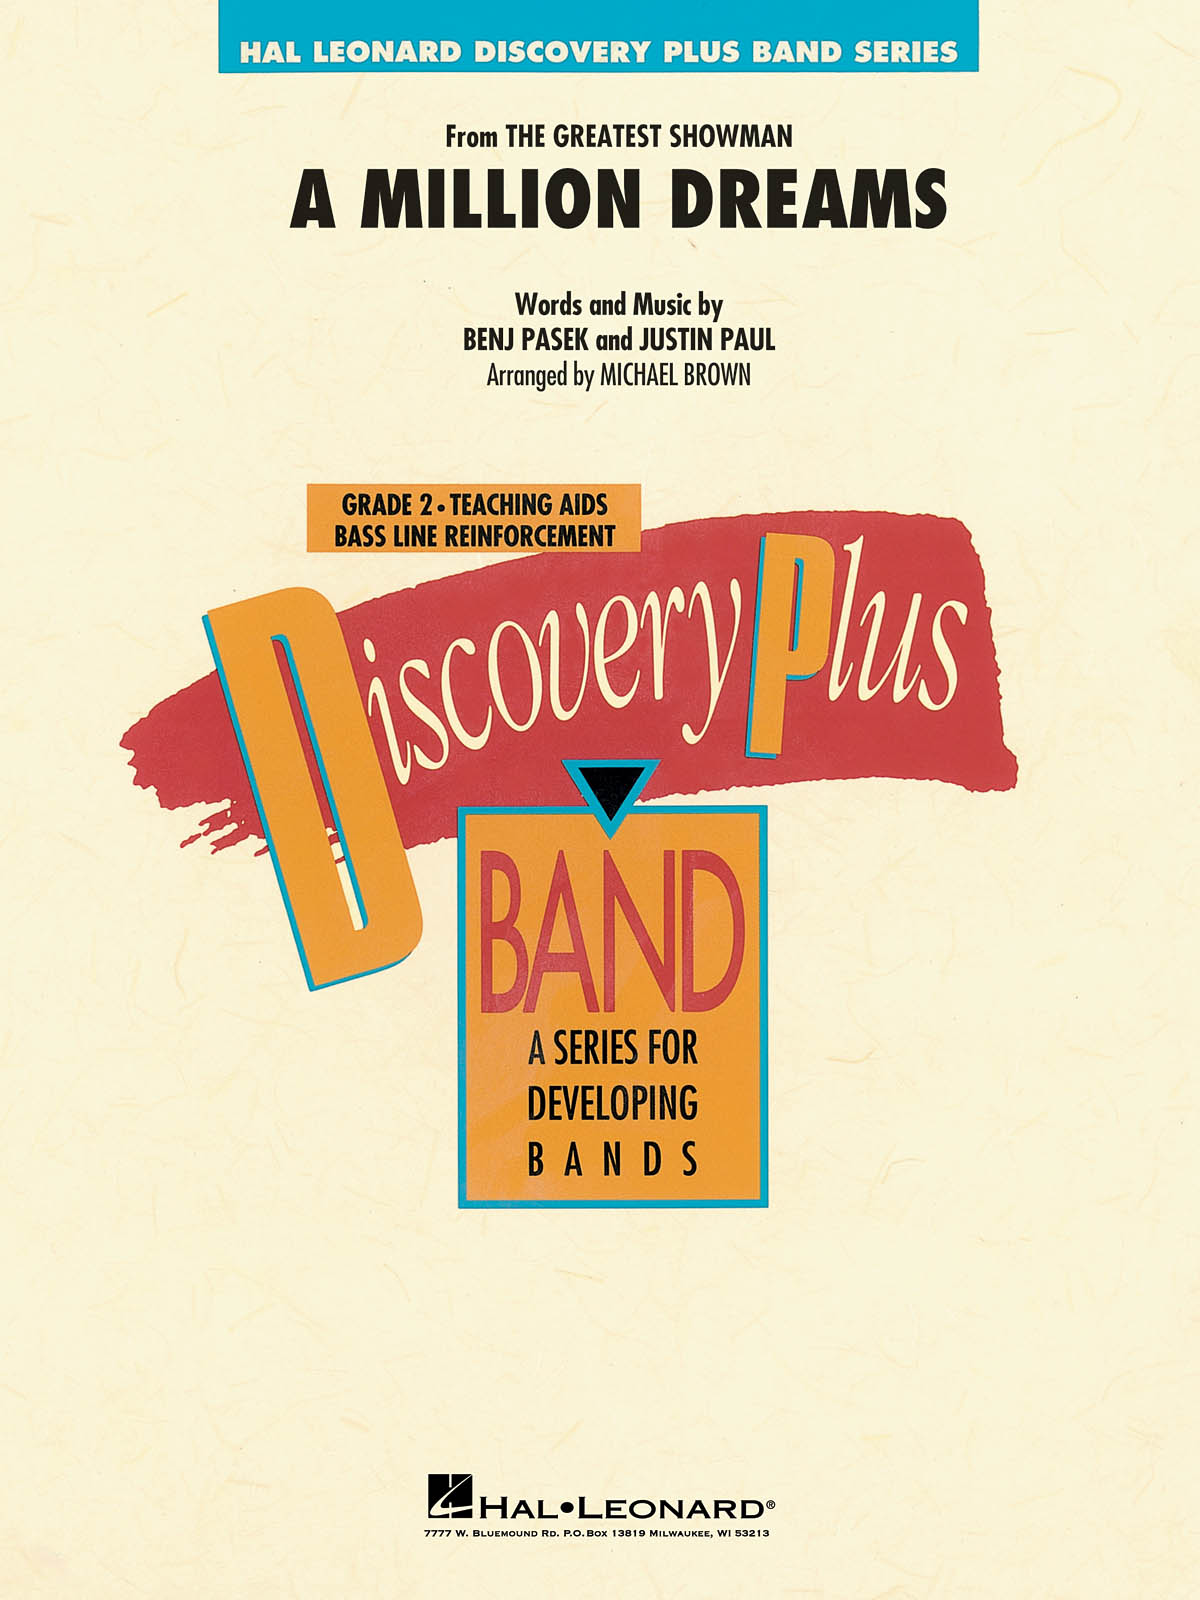 A Million Dreams (Greatest Showman) Discovery Plus Band